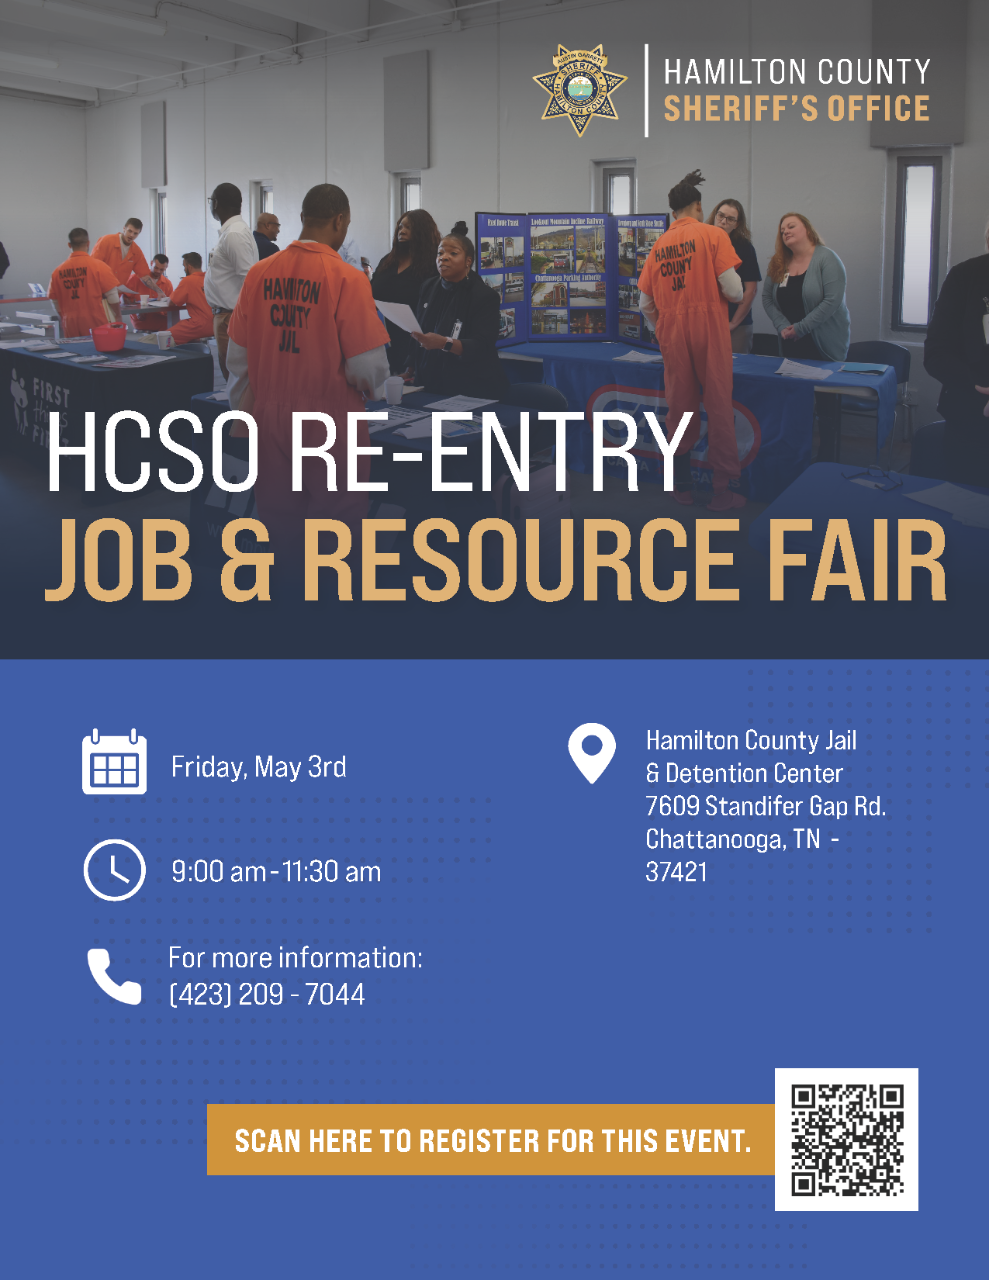 Re-entry Job & Resource Fair in Chattanooga is May 3